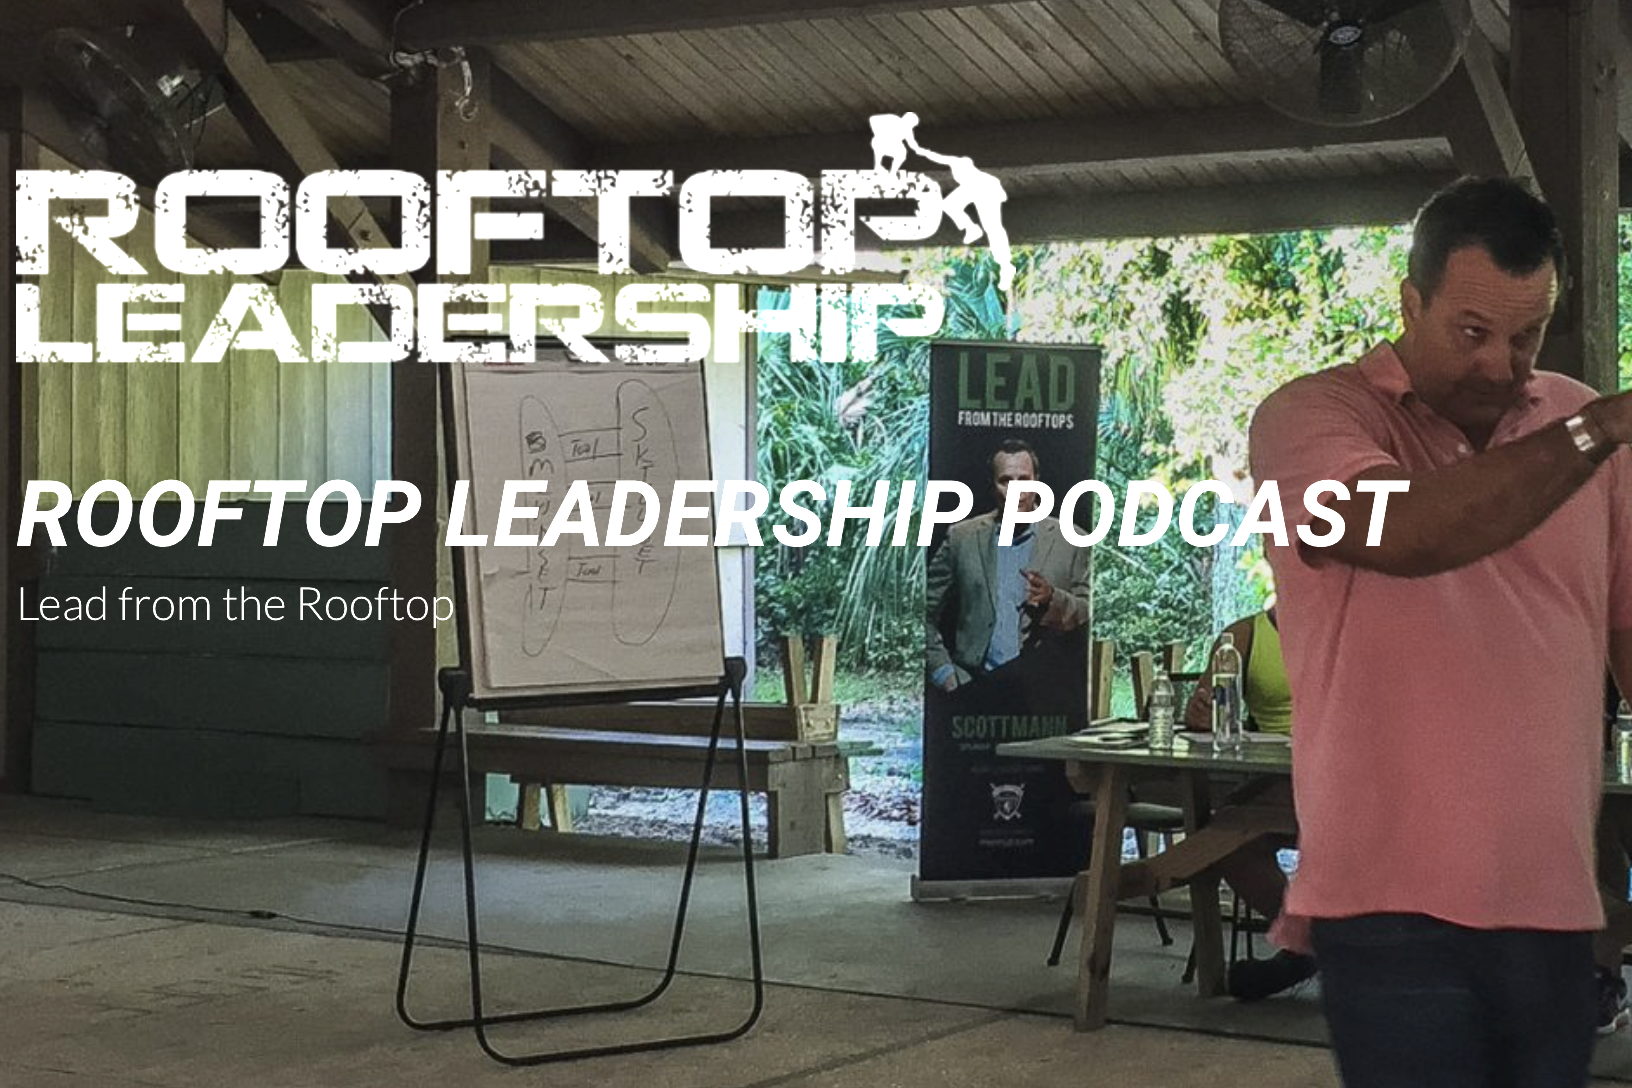 Rooftop Leadership Podcast, with Scott Man and John Bell